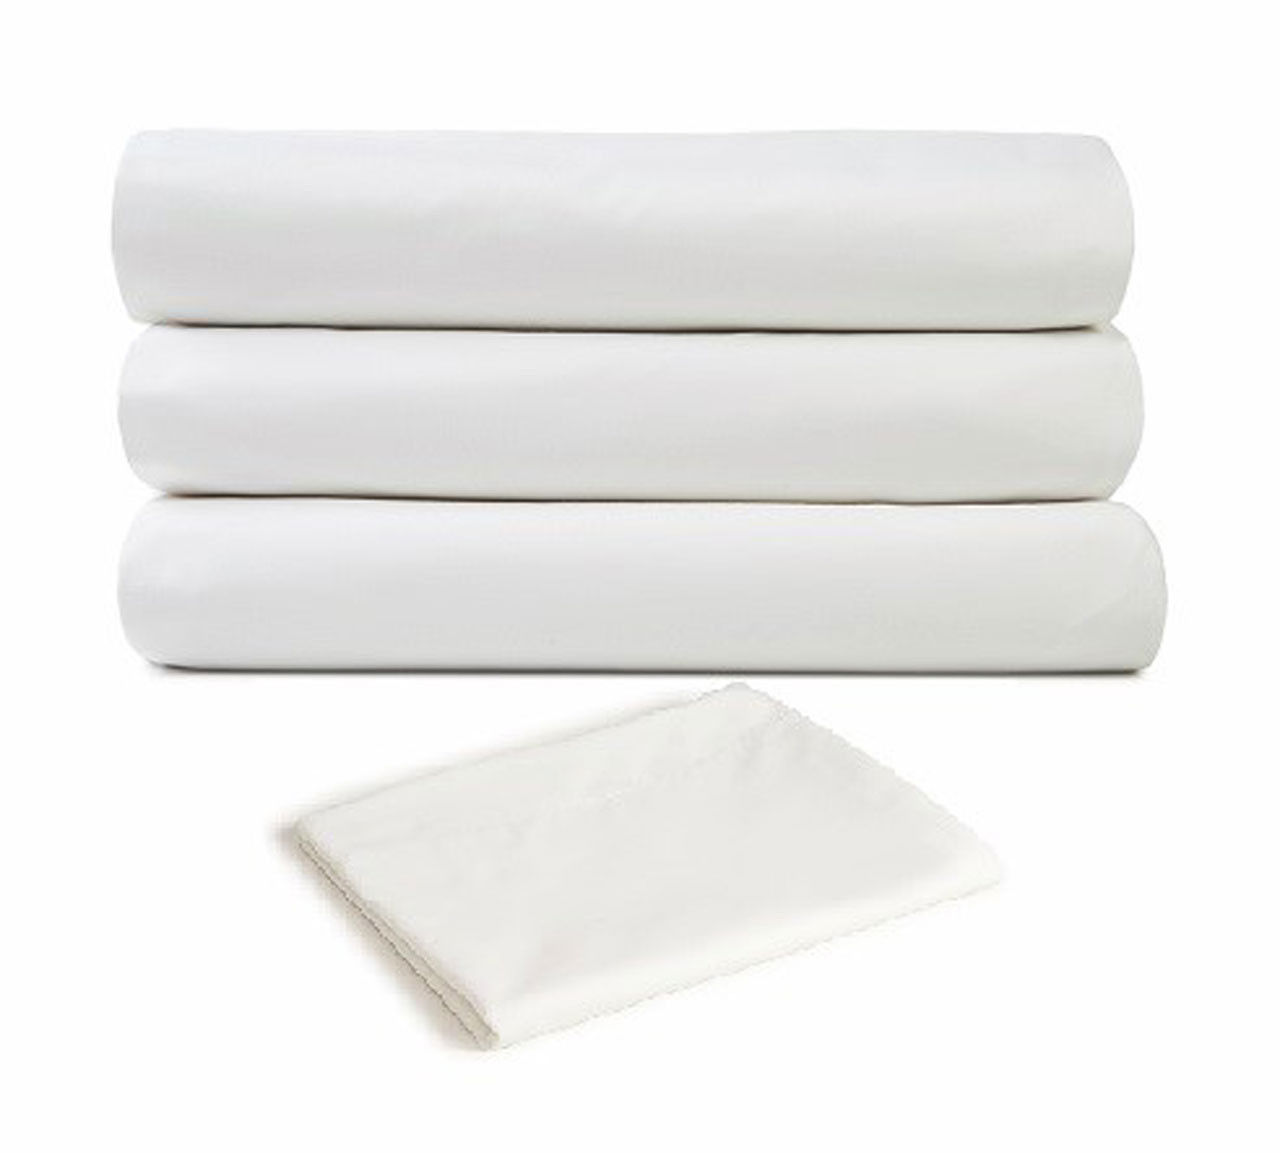 Is the T310 Premium Bed Sheets' thread count 60/40 cotton poly blend?